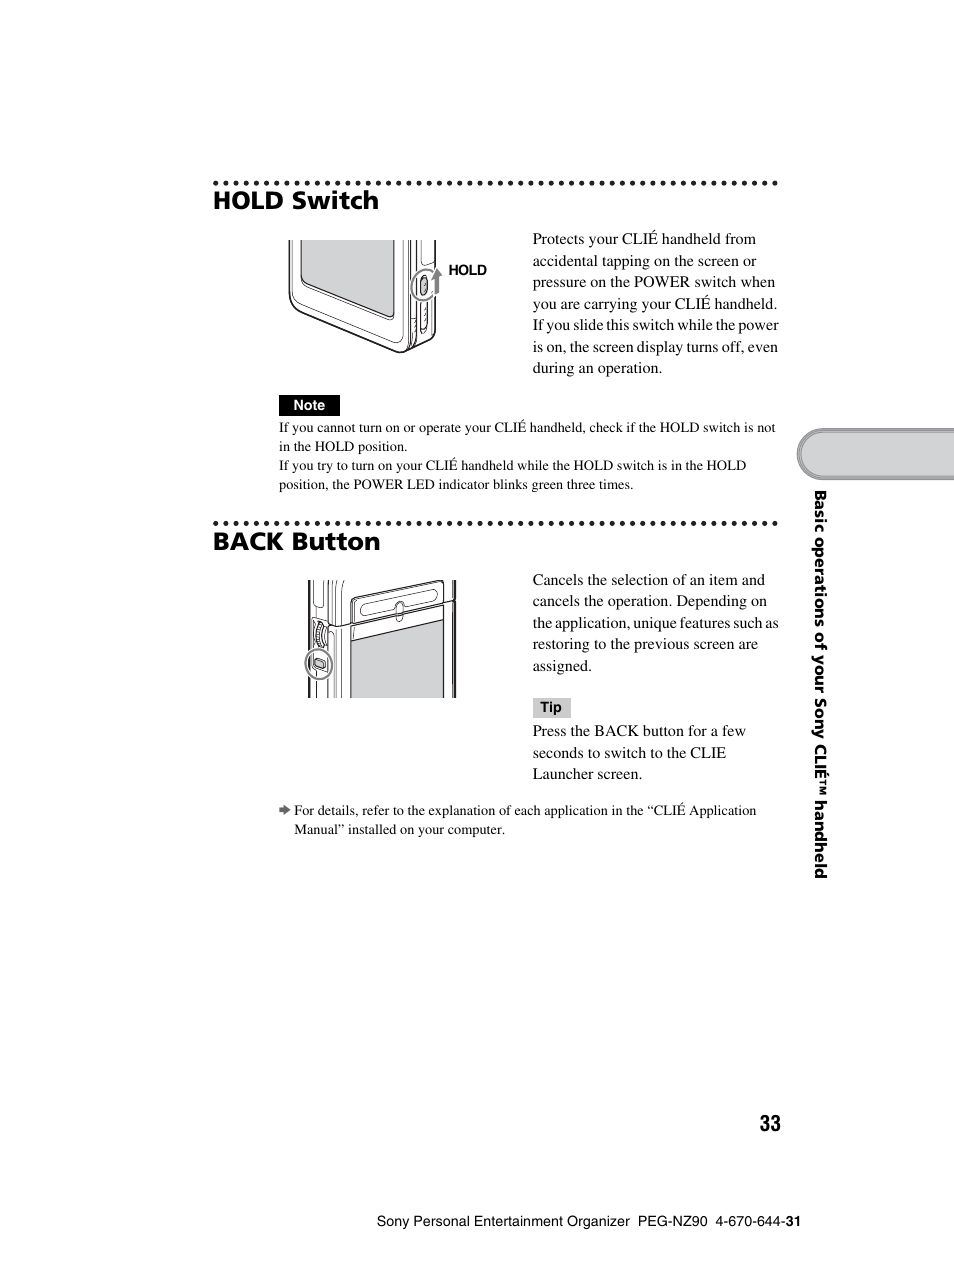 Hold switch, Back button | Sony PEG-NZ90 User Manual | Page 33 / 115